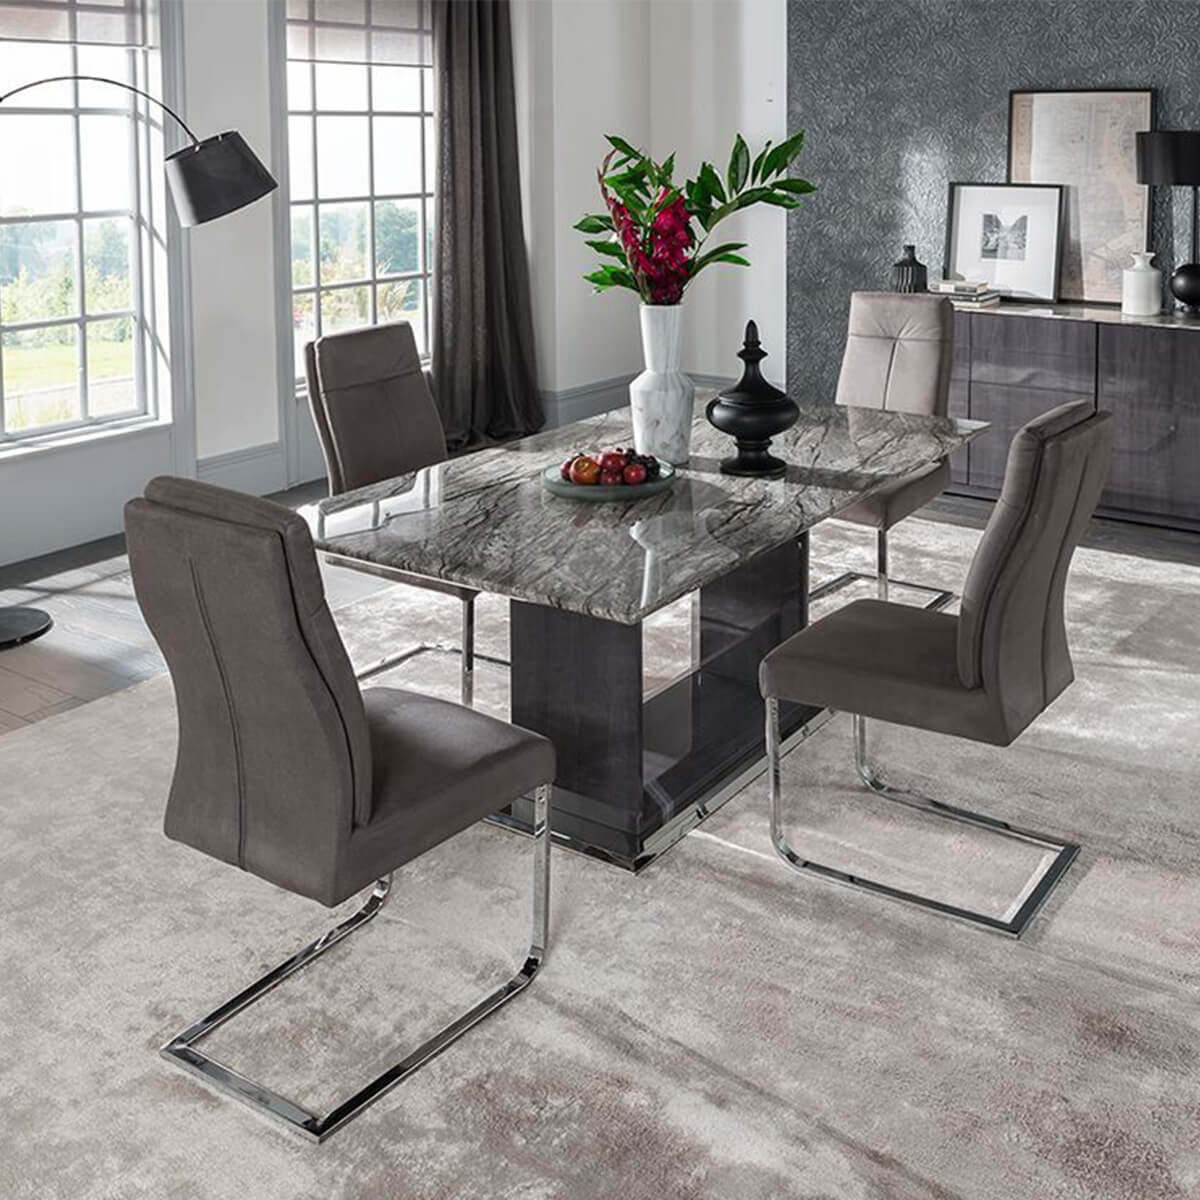 Marble Dining Table Set Manchester • Faucet Ideas Site